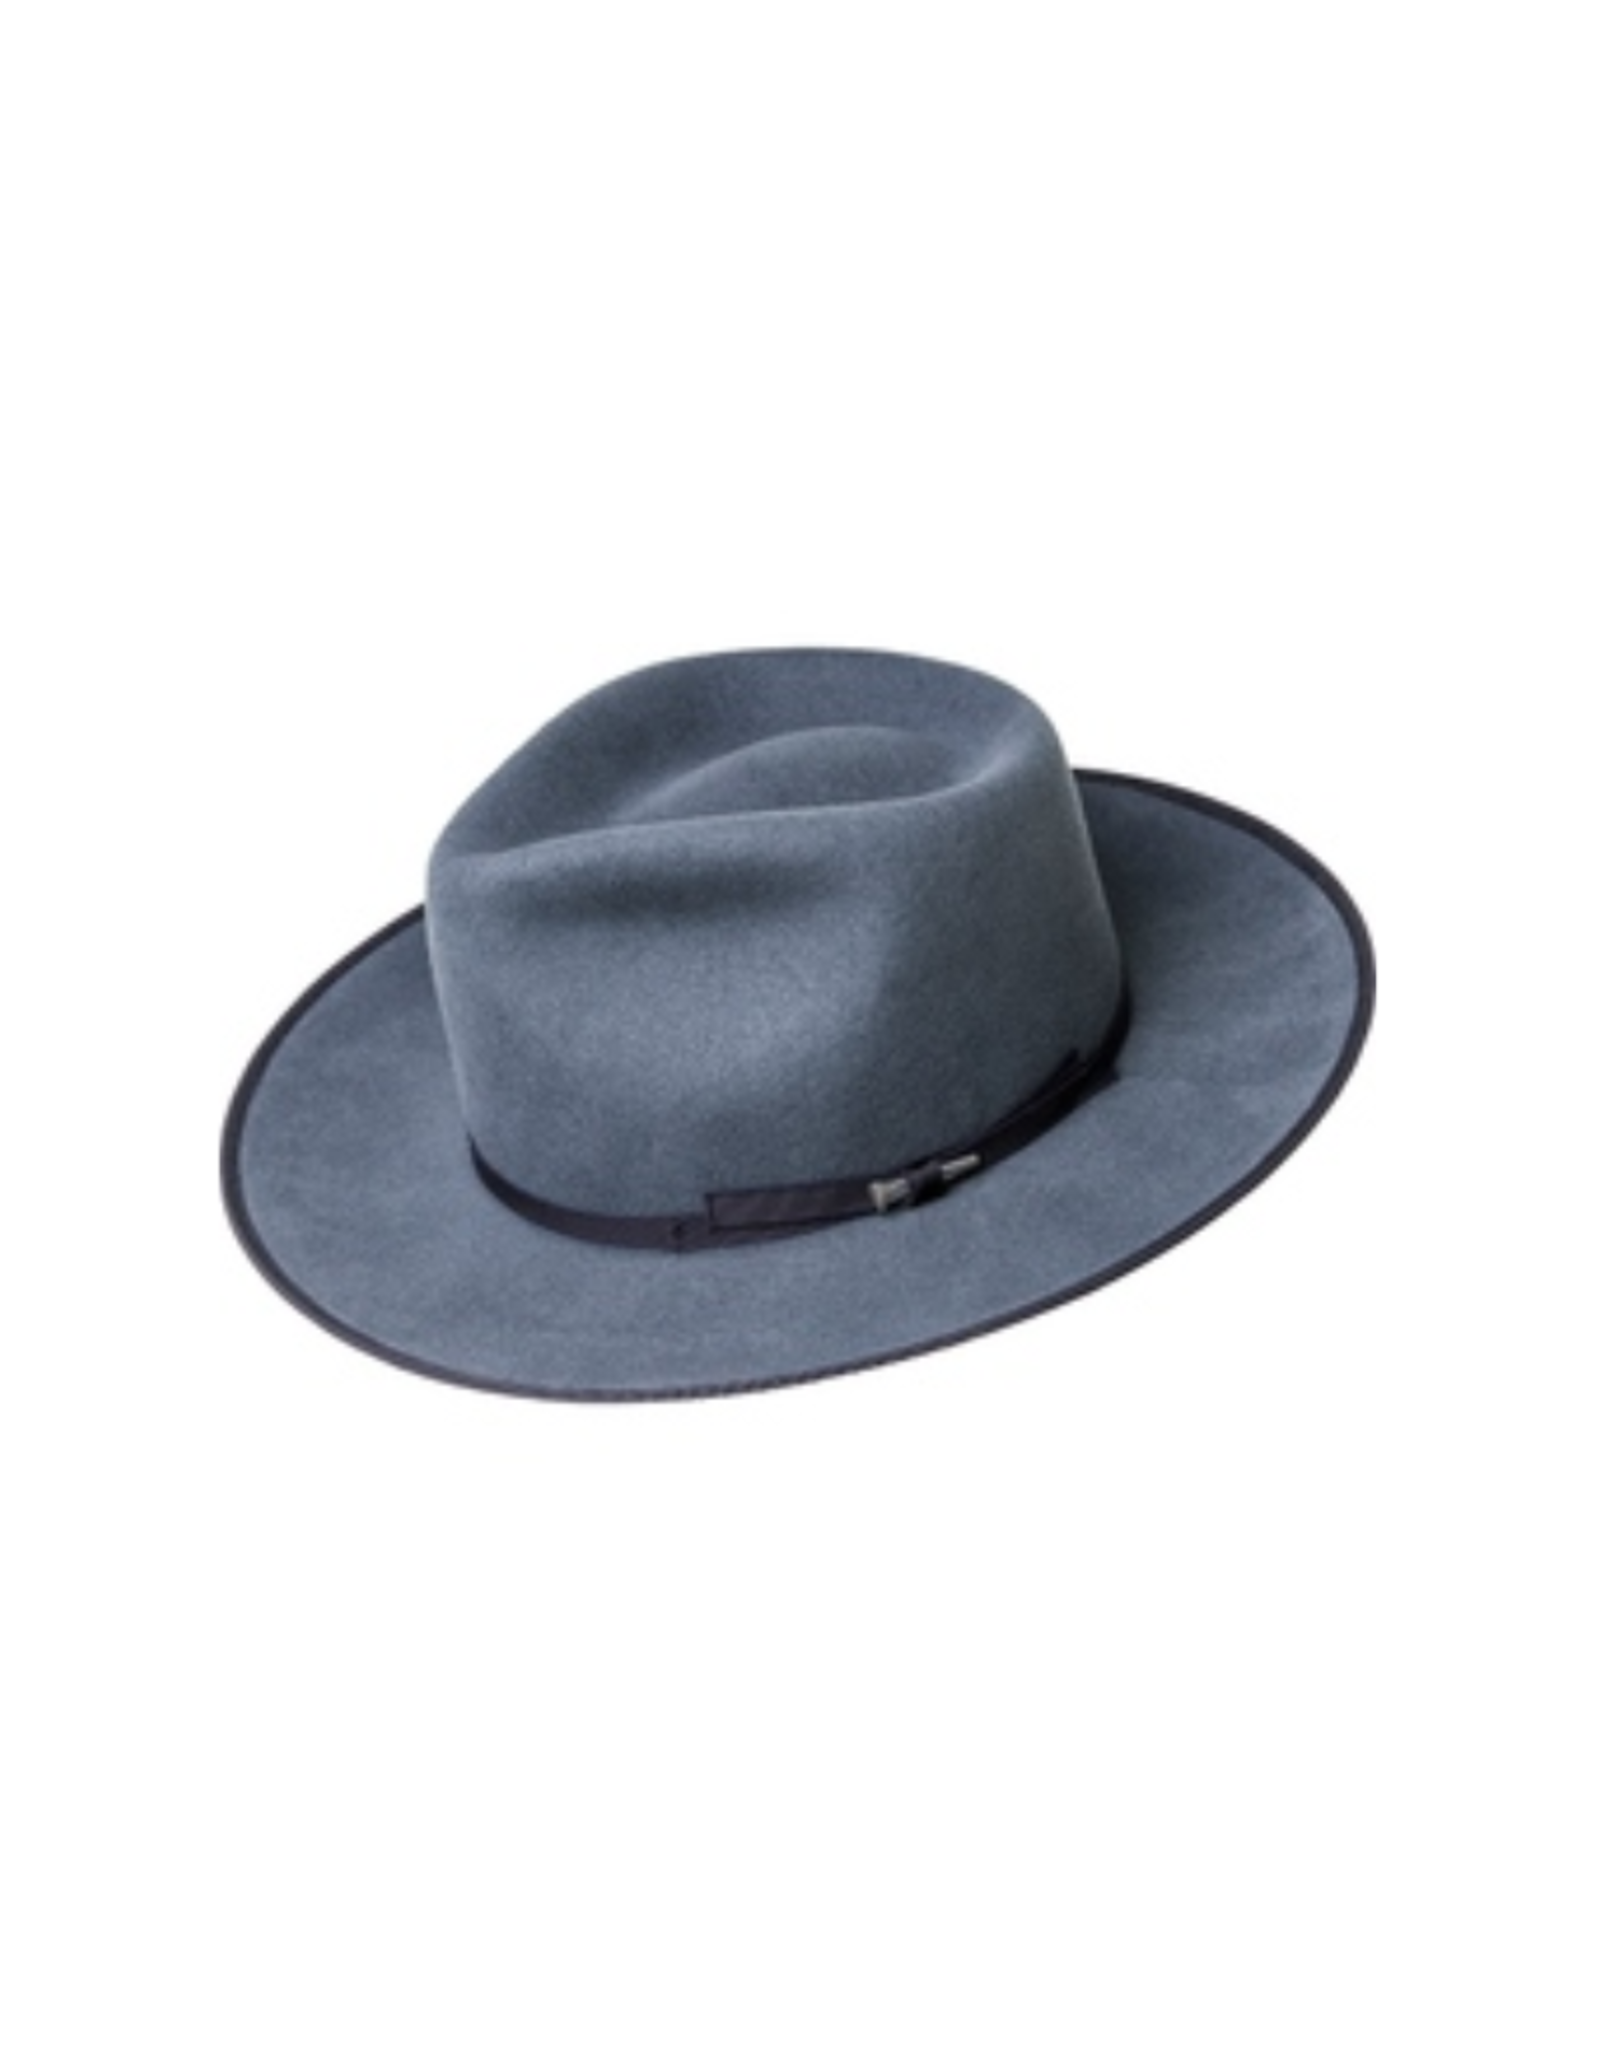 Bailey Hat Co. HAT-FEDORA "COLVER"  W/BOUND EDGE NARROW BAND